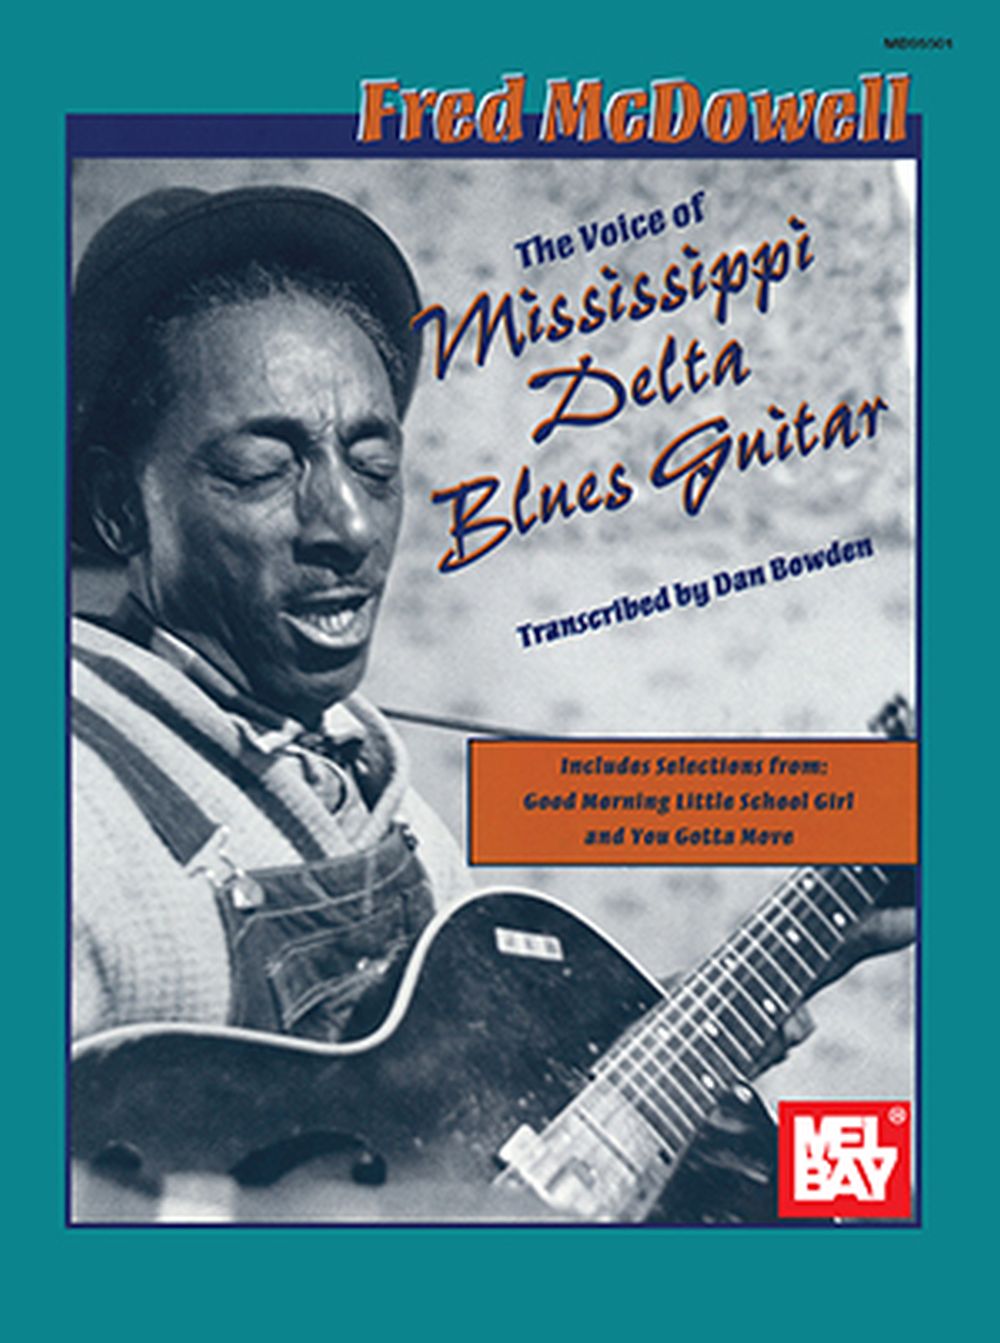 The Voice Of Mississippi Delta Blues Guitar